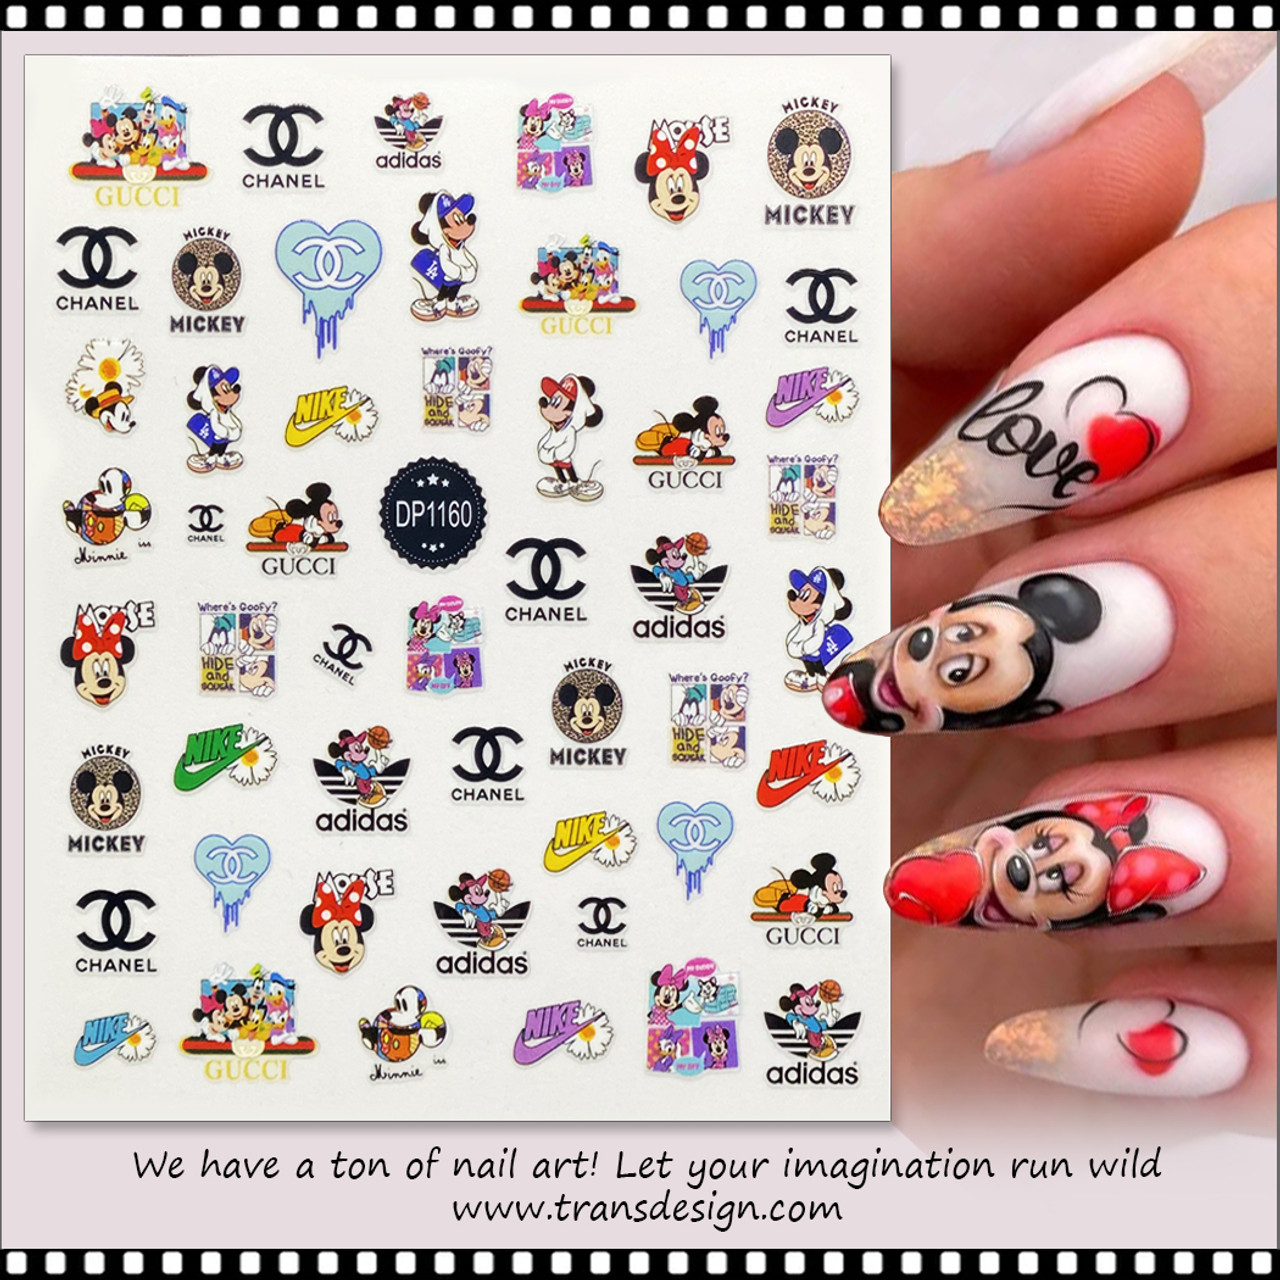 From Chanel to Gucci: Brand logo nail art is the latest manicure